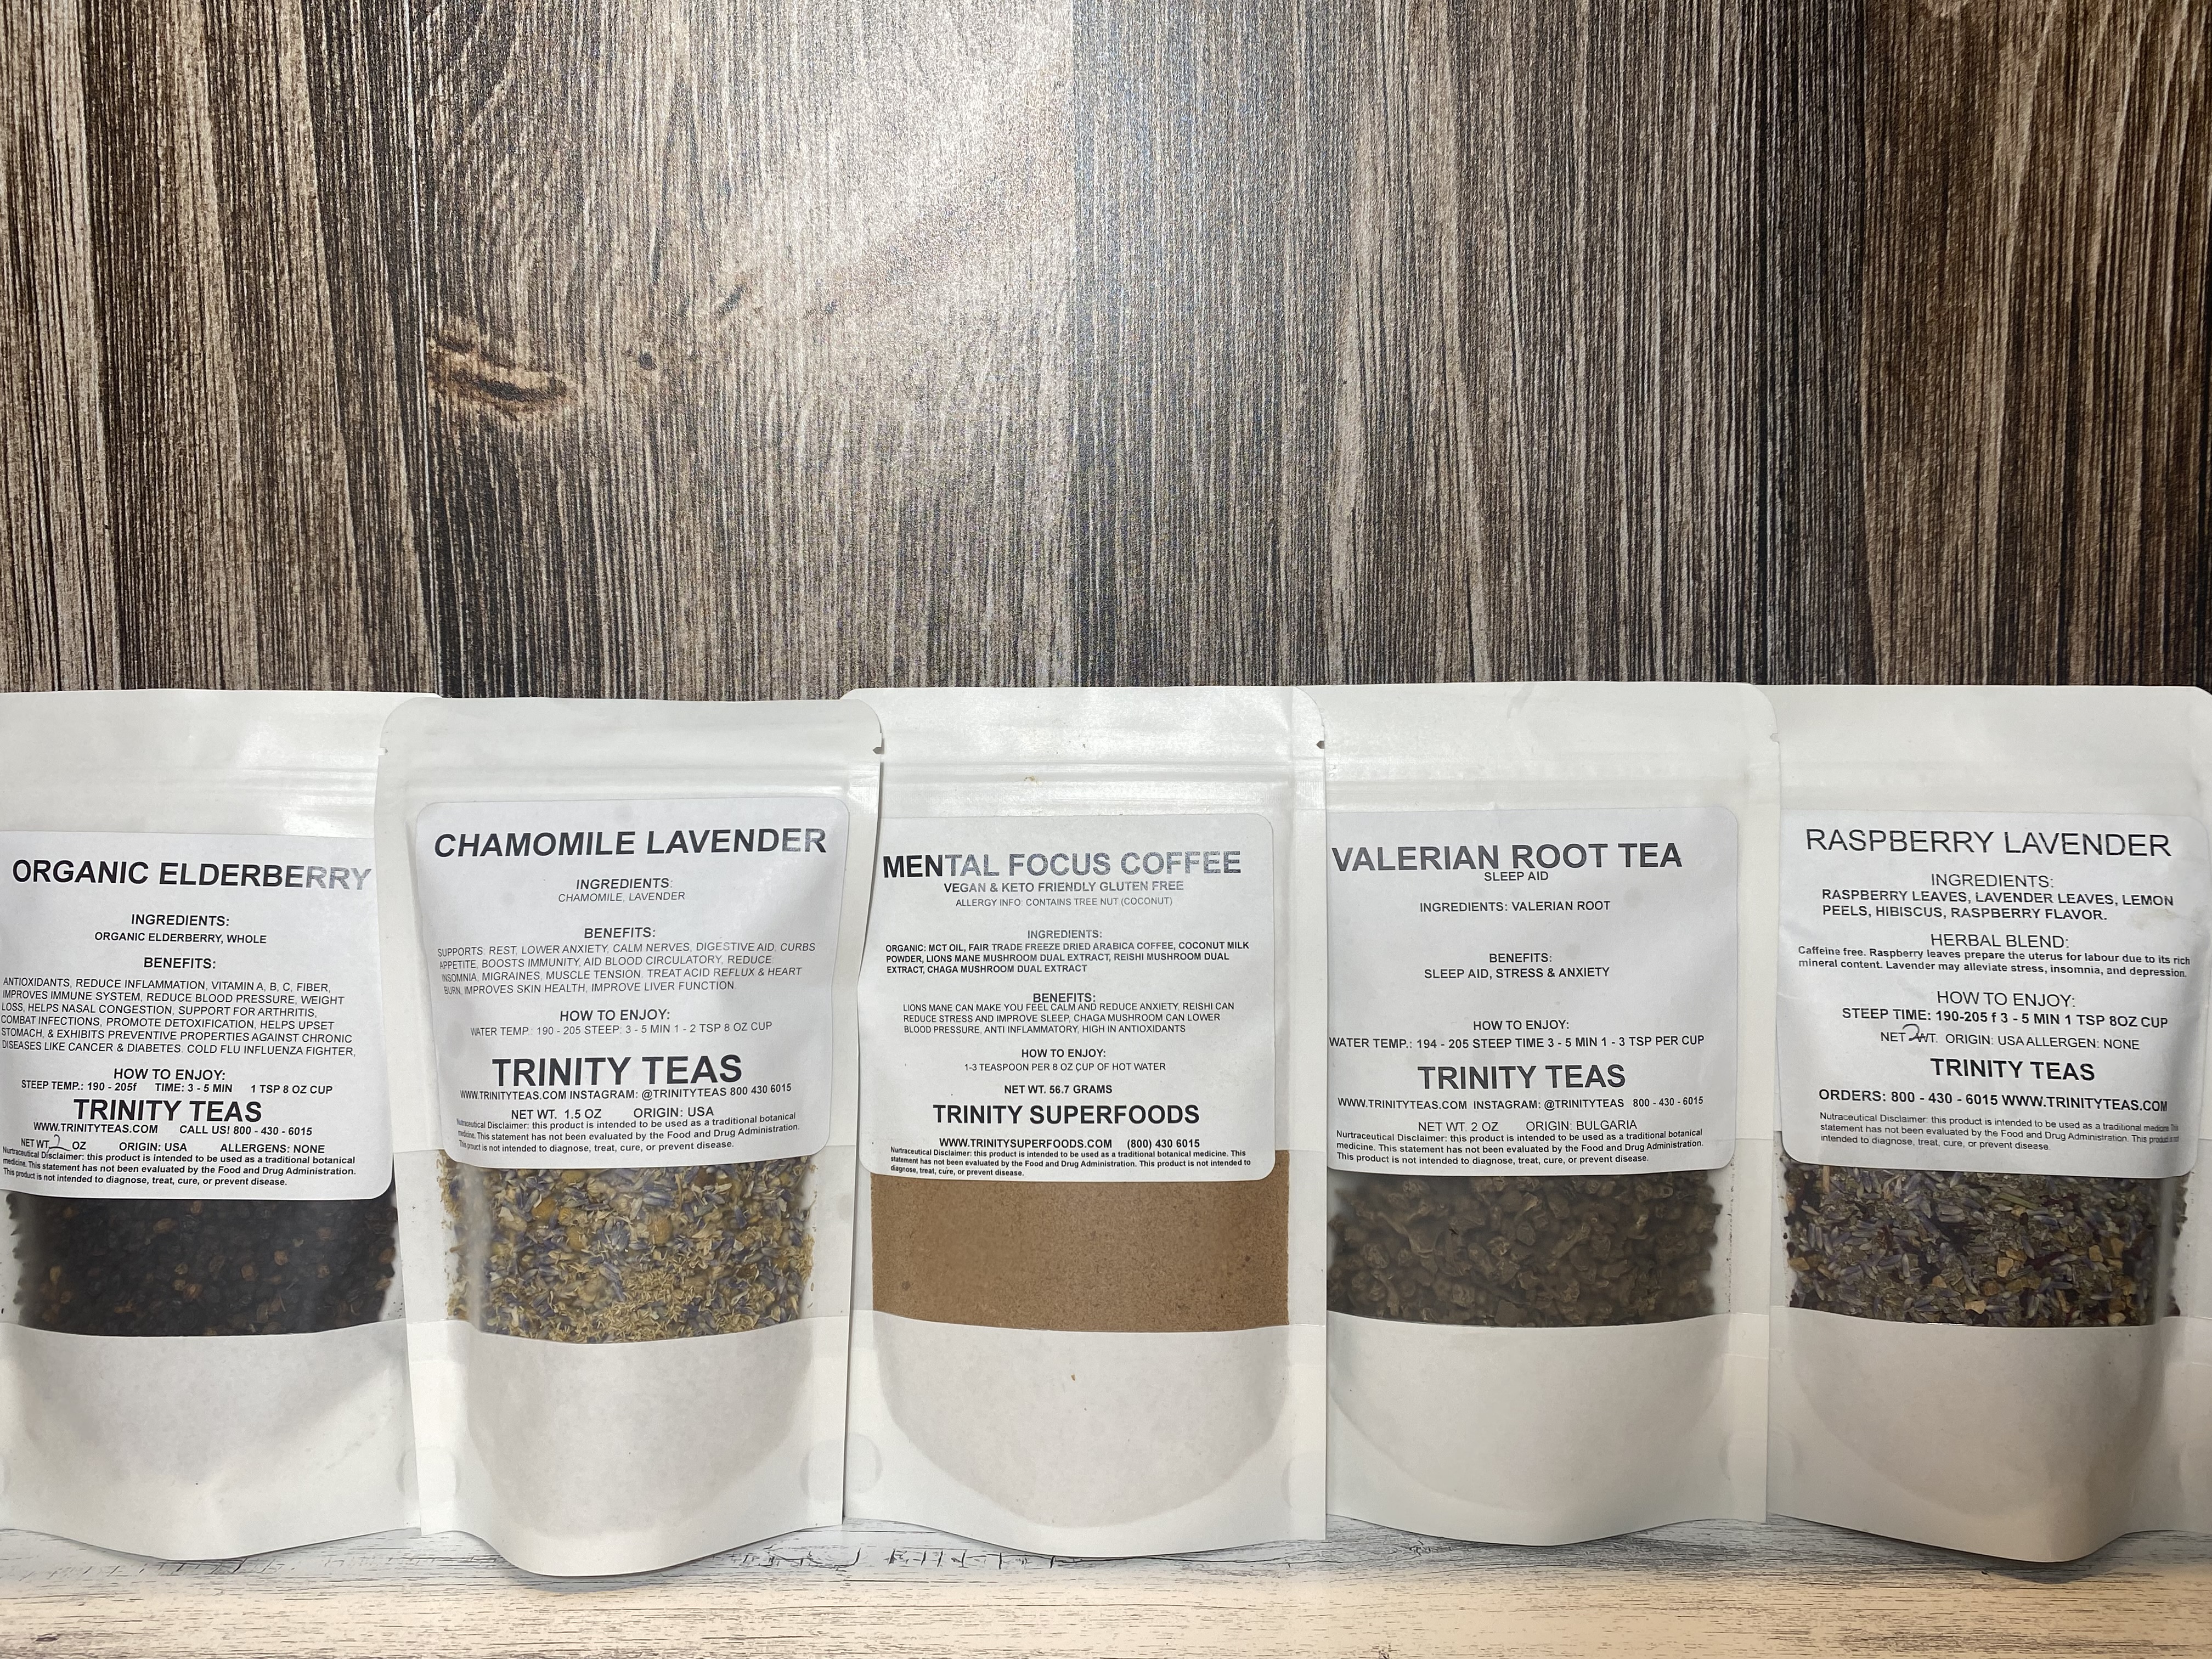 Product Image for Tea Assortment, comment below for selection